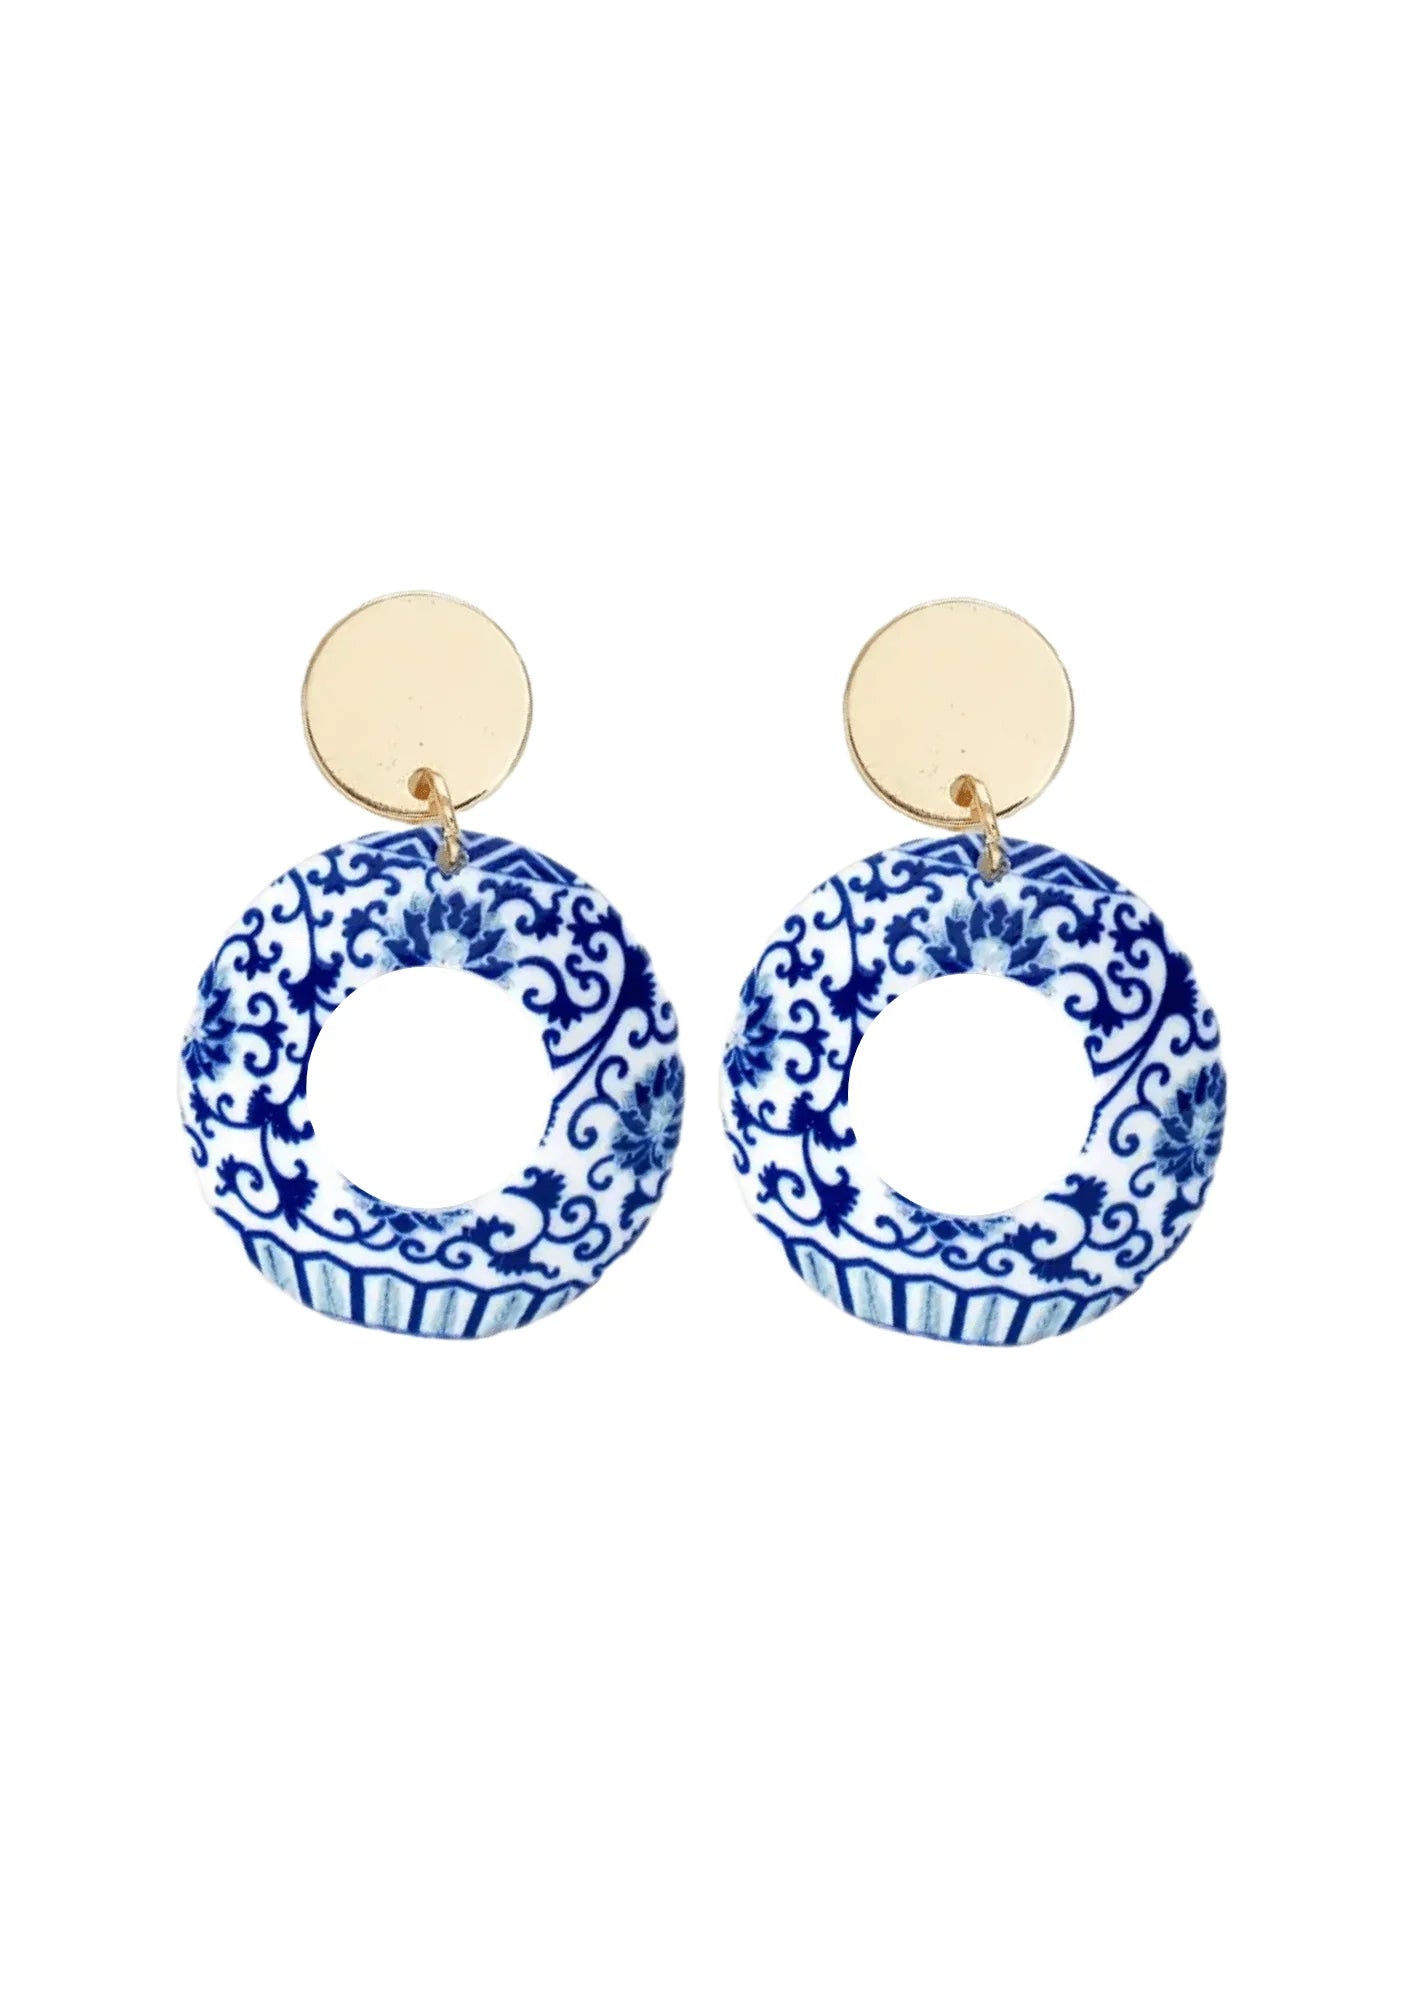 BLUE ACRYLIC CHINESE STYLE EARRINGS